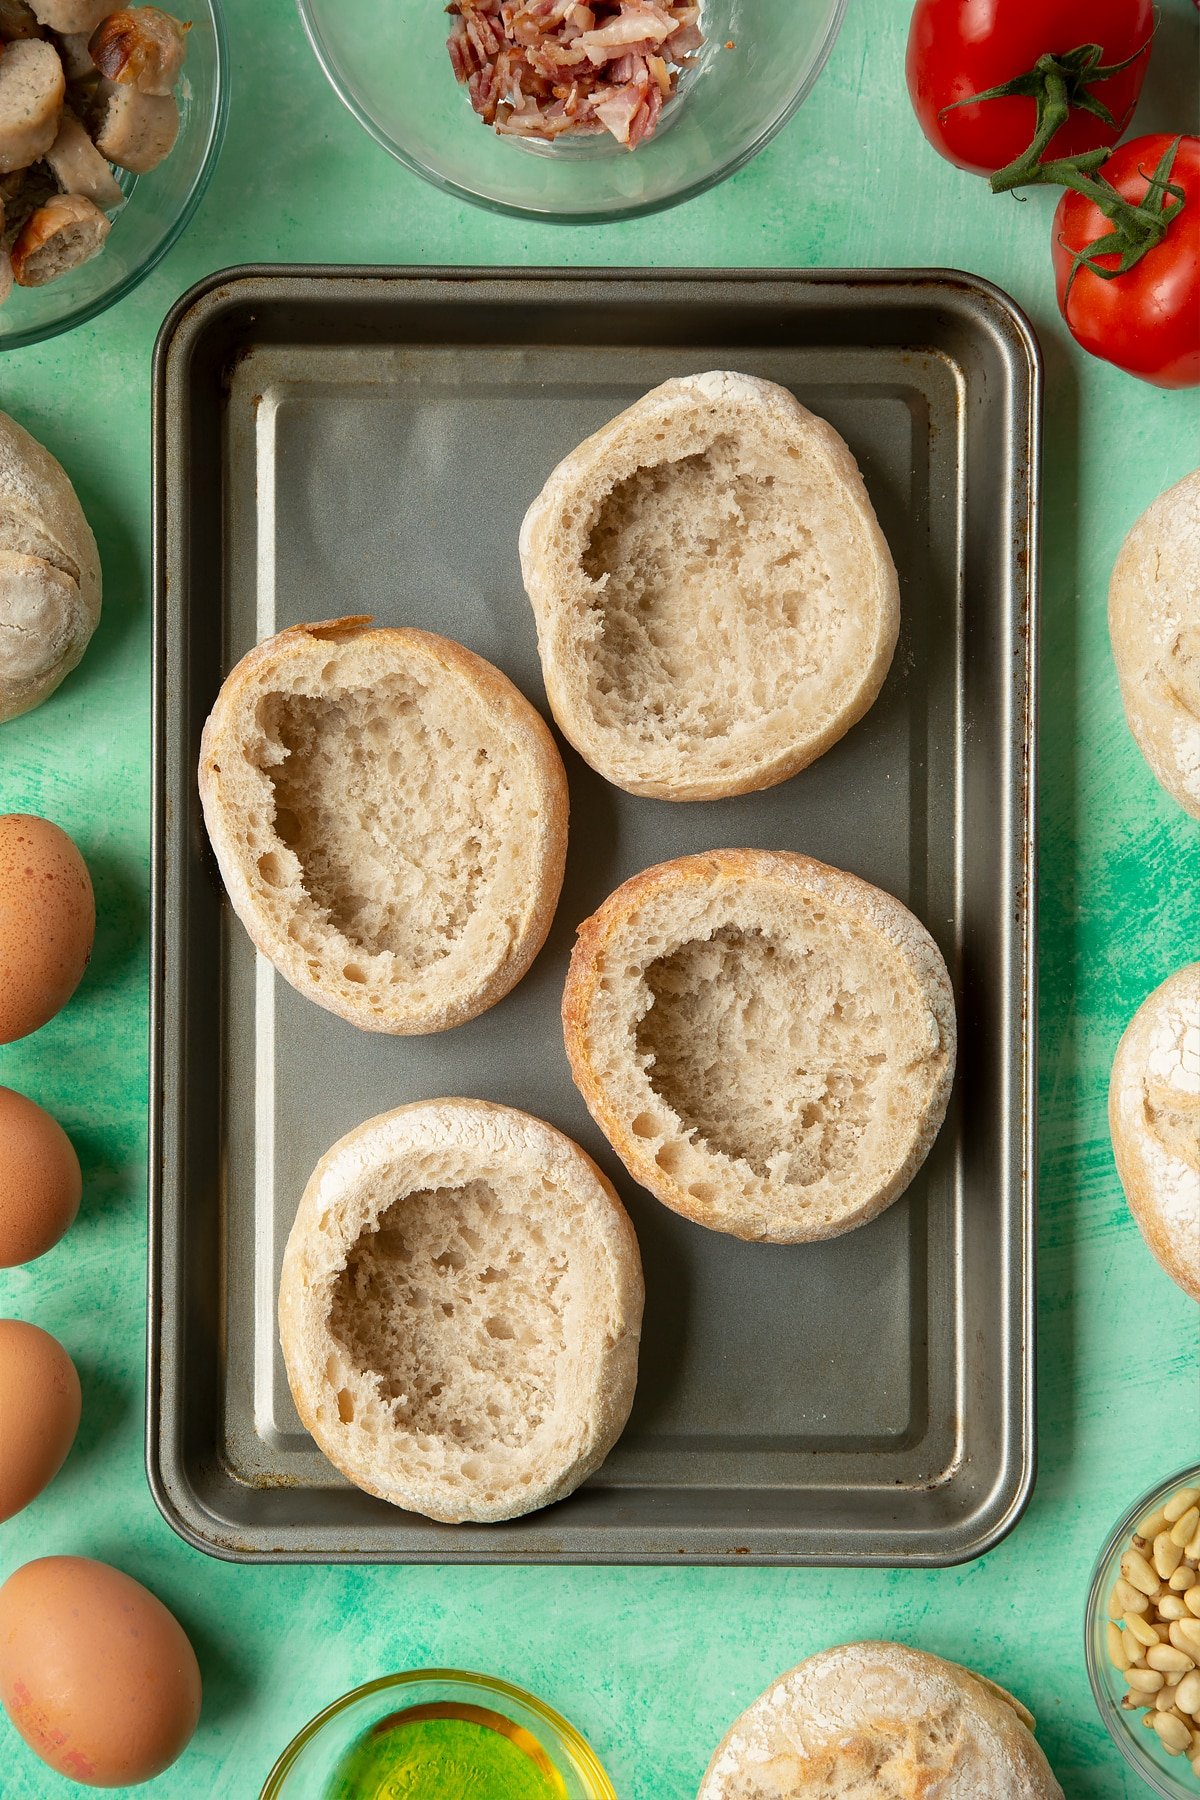 Four crusty bread rolls on a baking tray. The tops have been cut off and most of the inner crumb removed. The tray is surrounded by ingredients to make breakfast rolls.